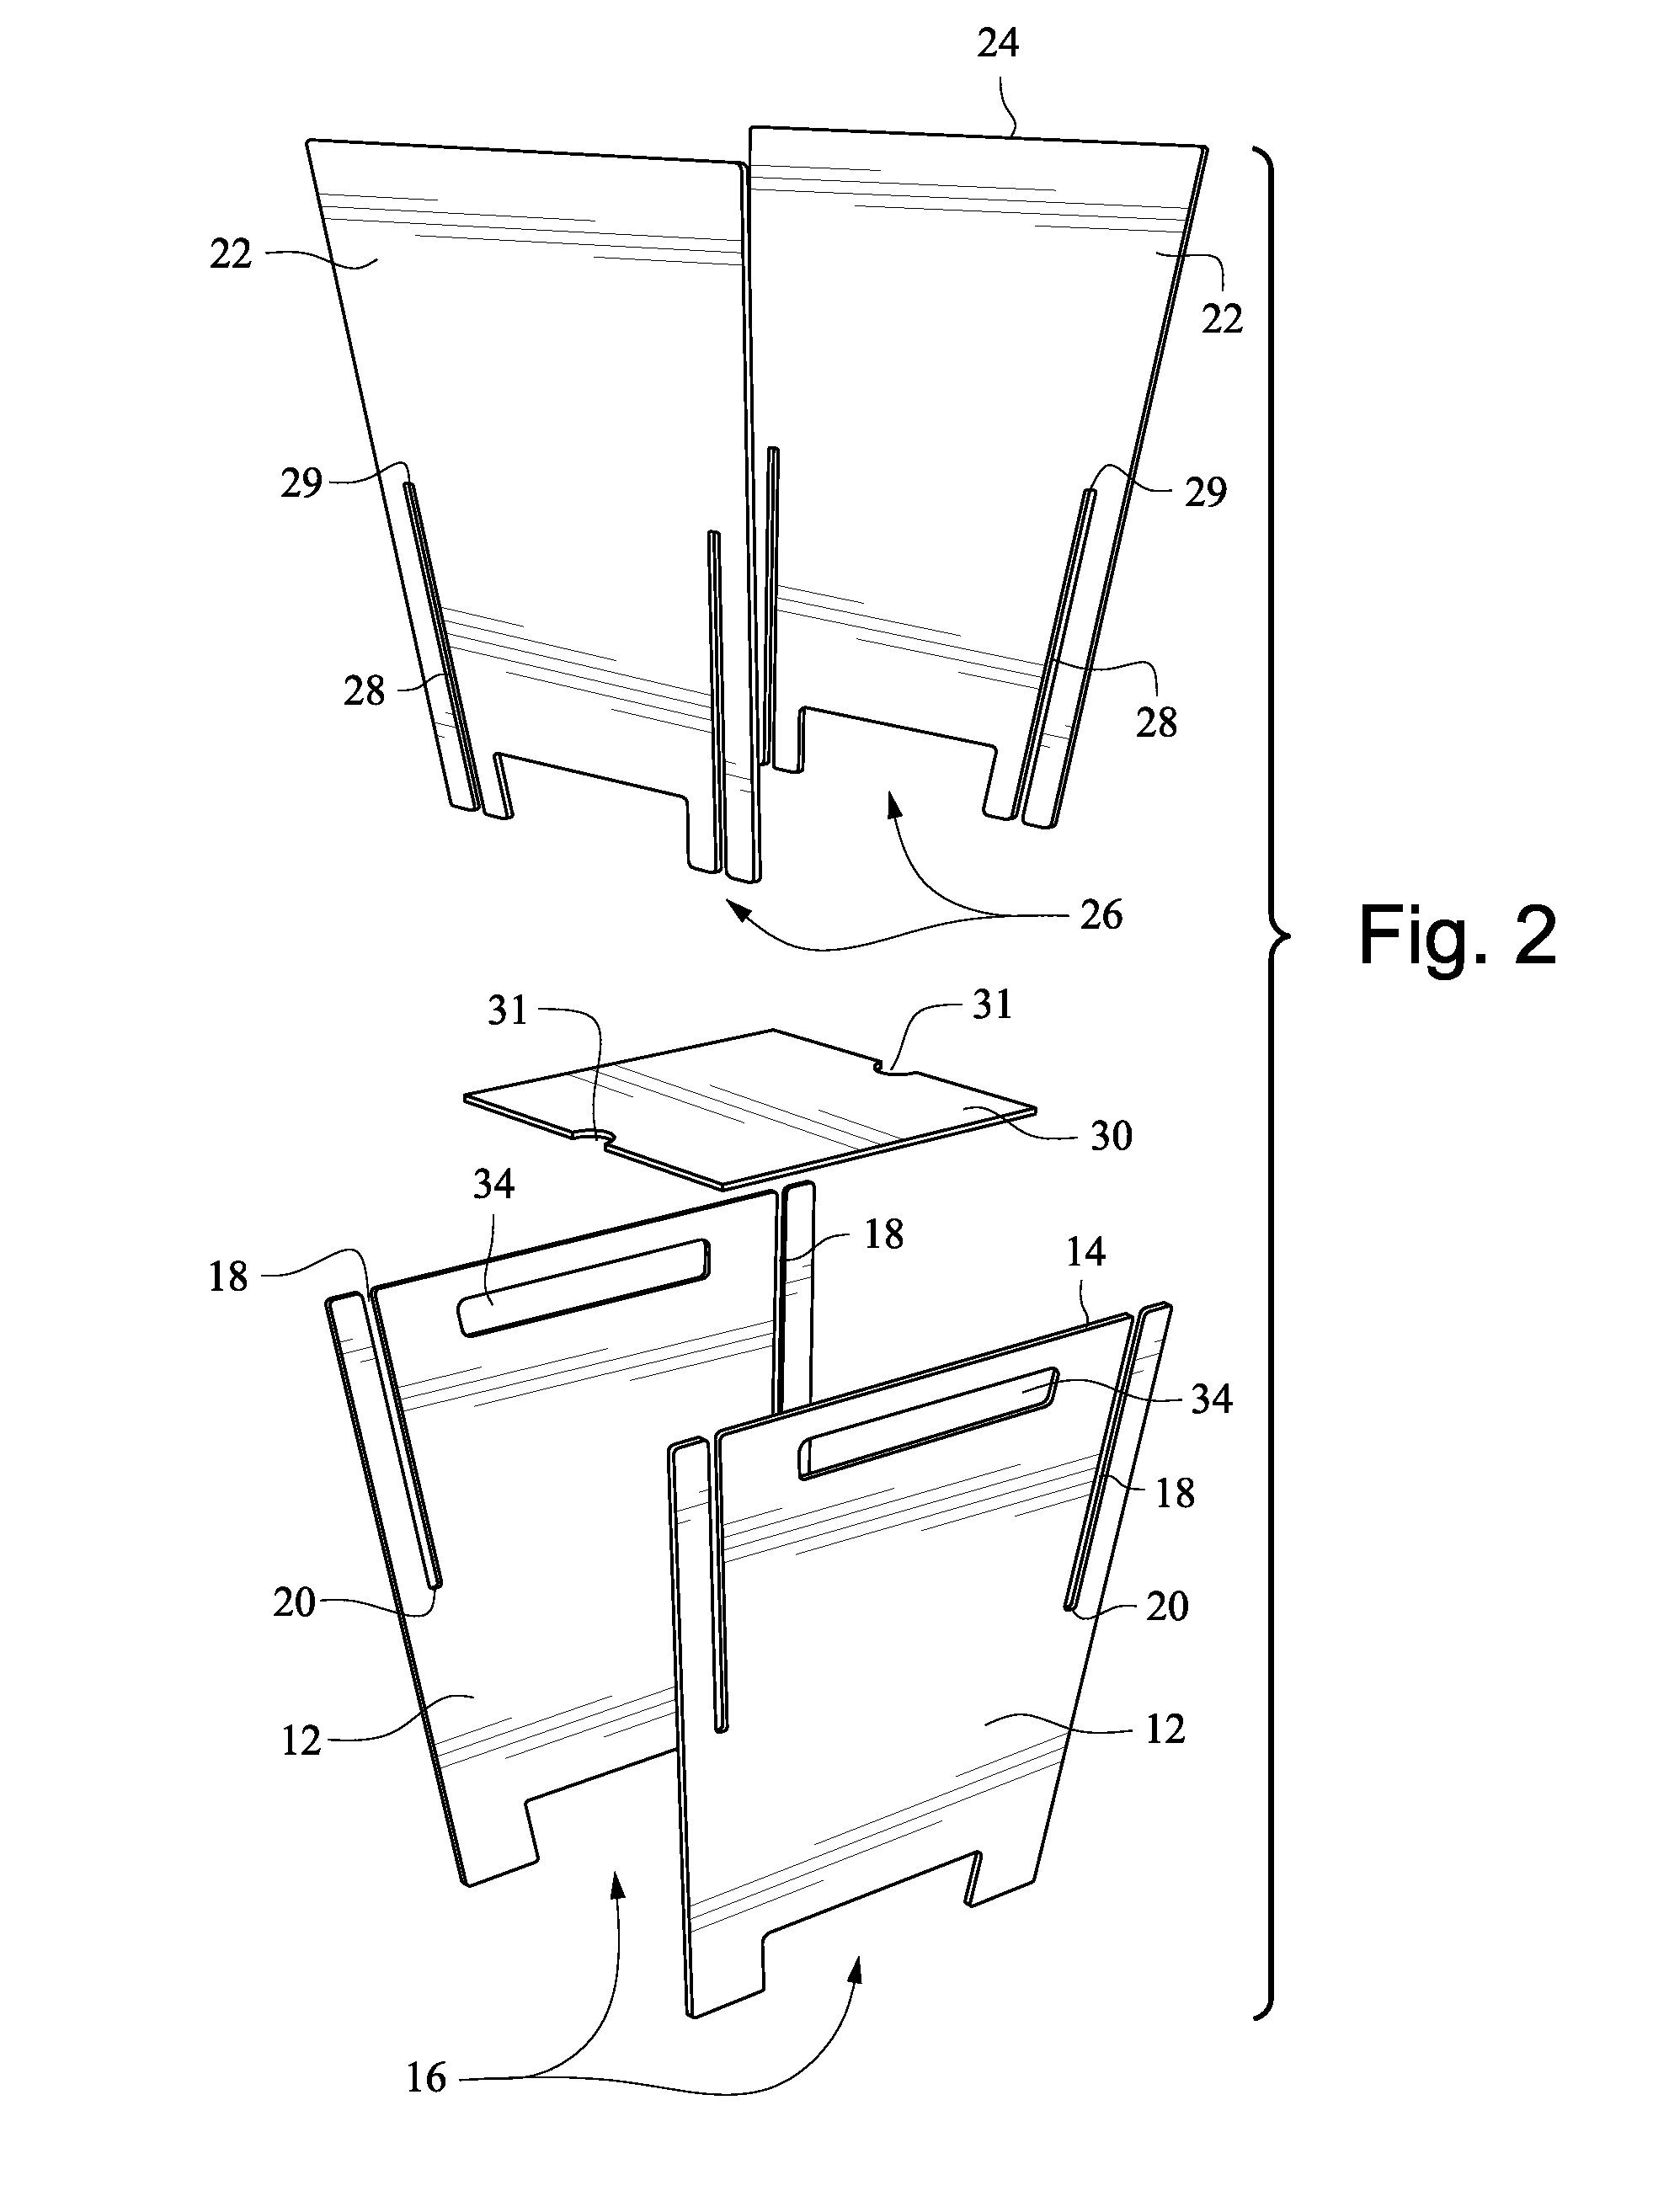 Multi-use flat pack product and method